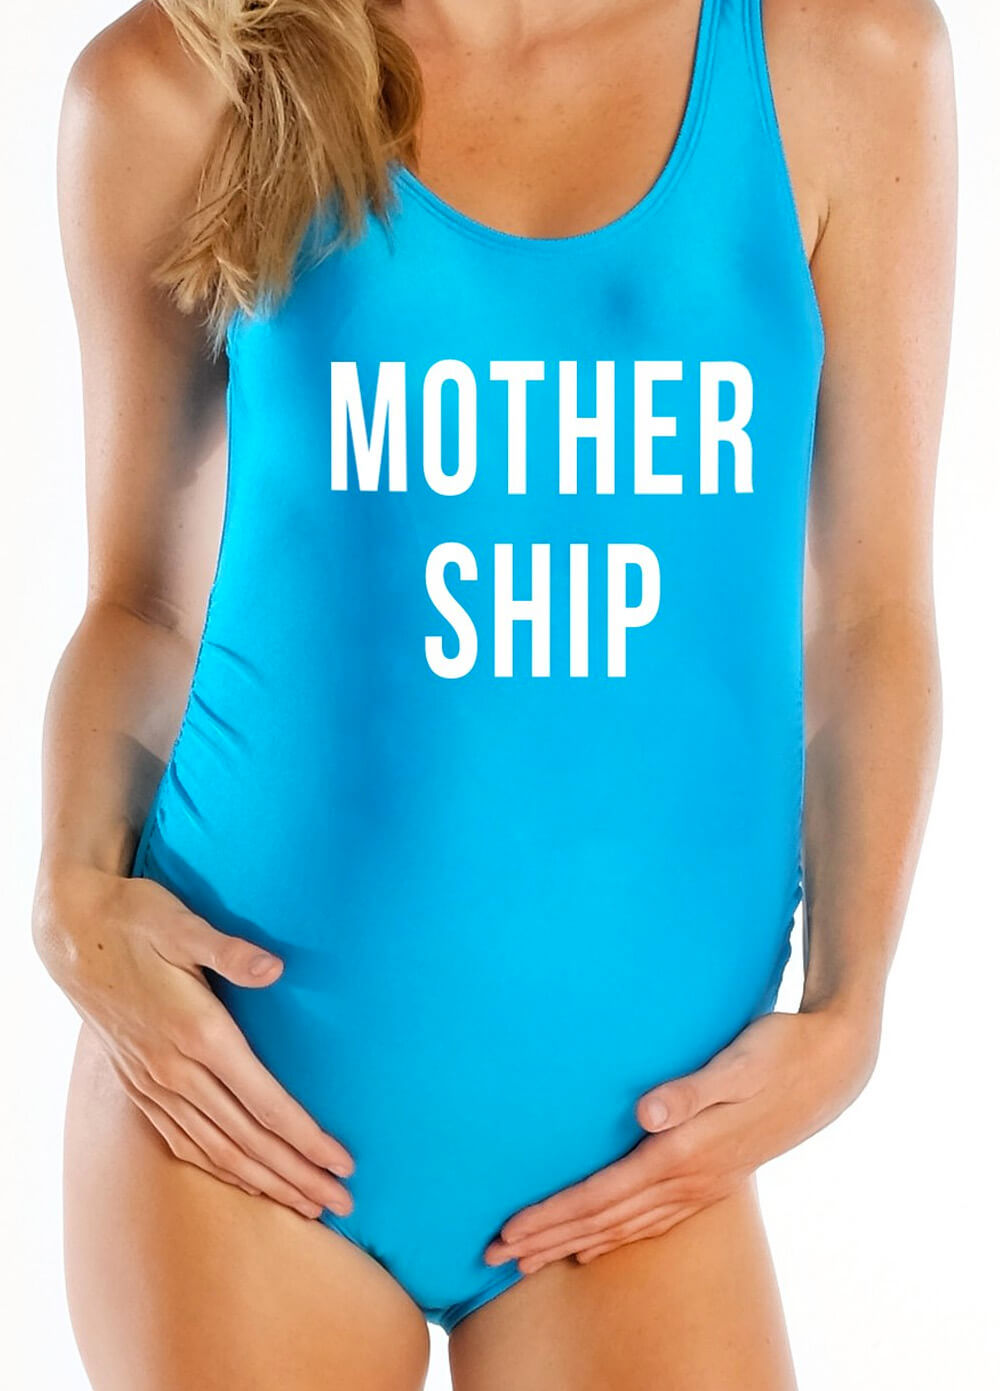 Mothership Maternity Swimsuit in Blue by Mamagama